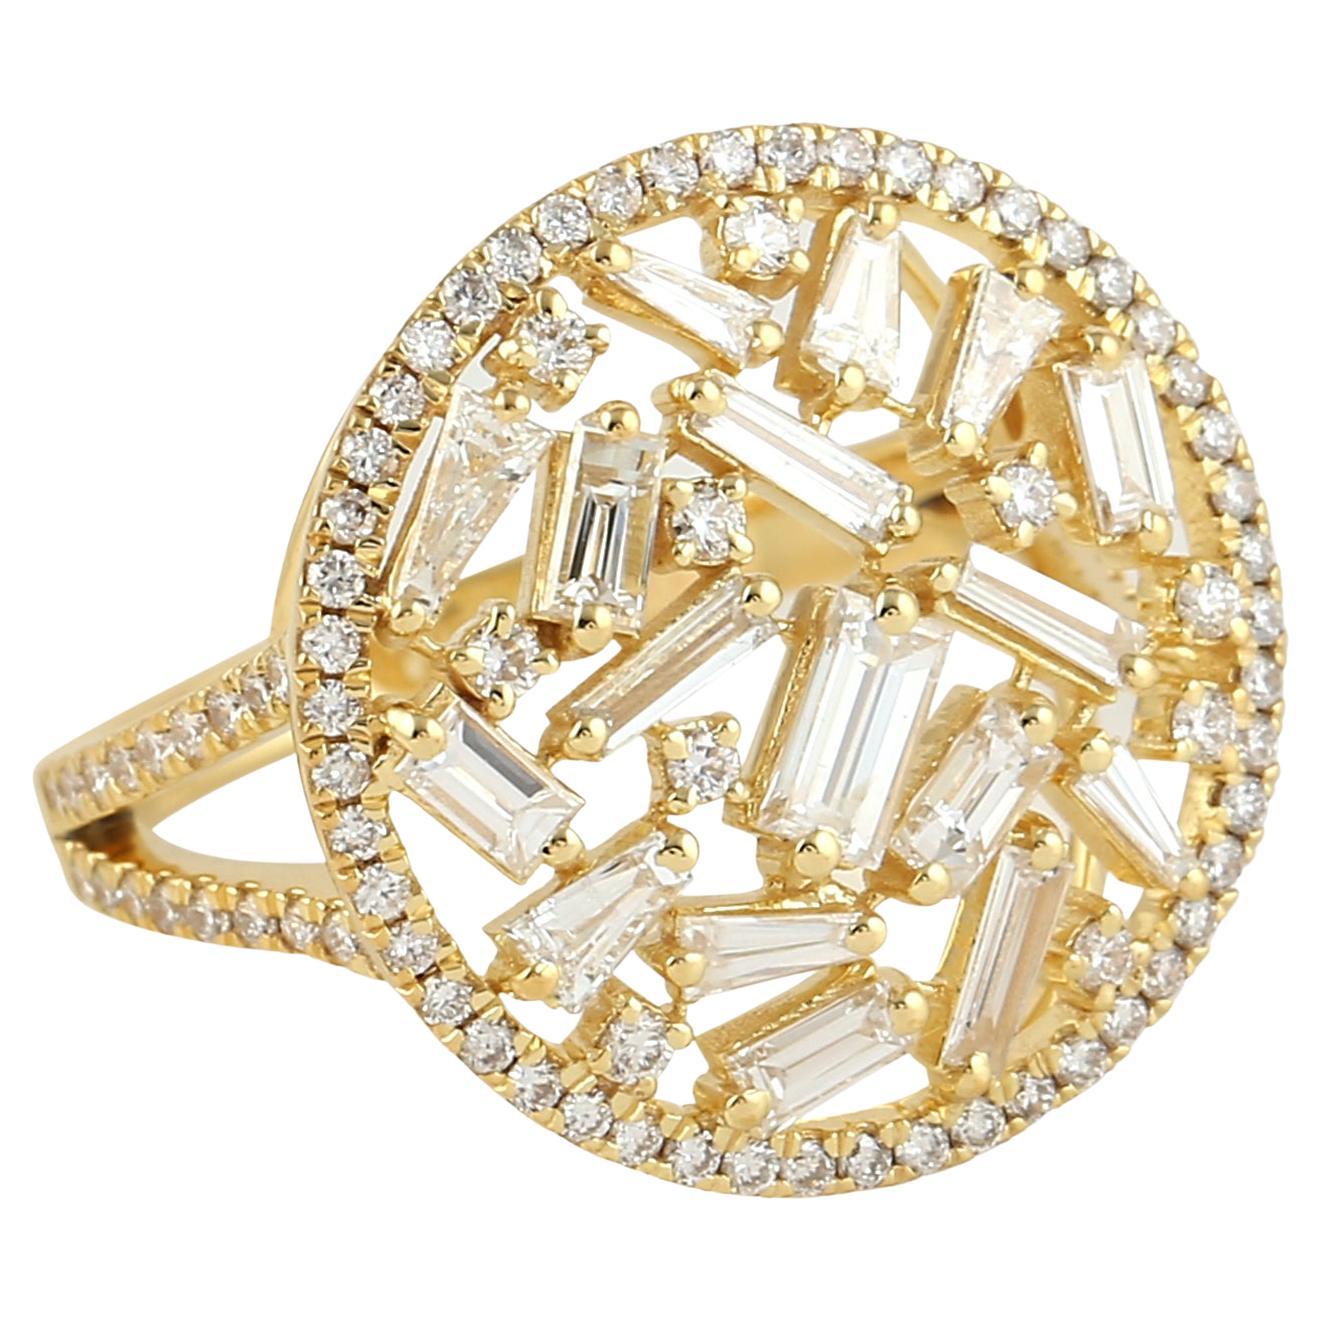 Baguette Diamonds Ring Made In 18k Yellow Gold